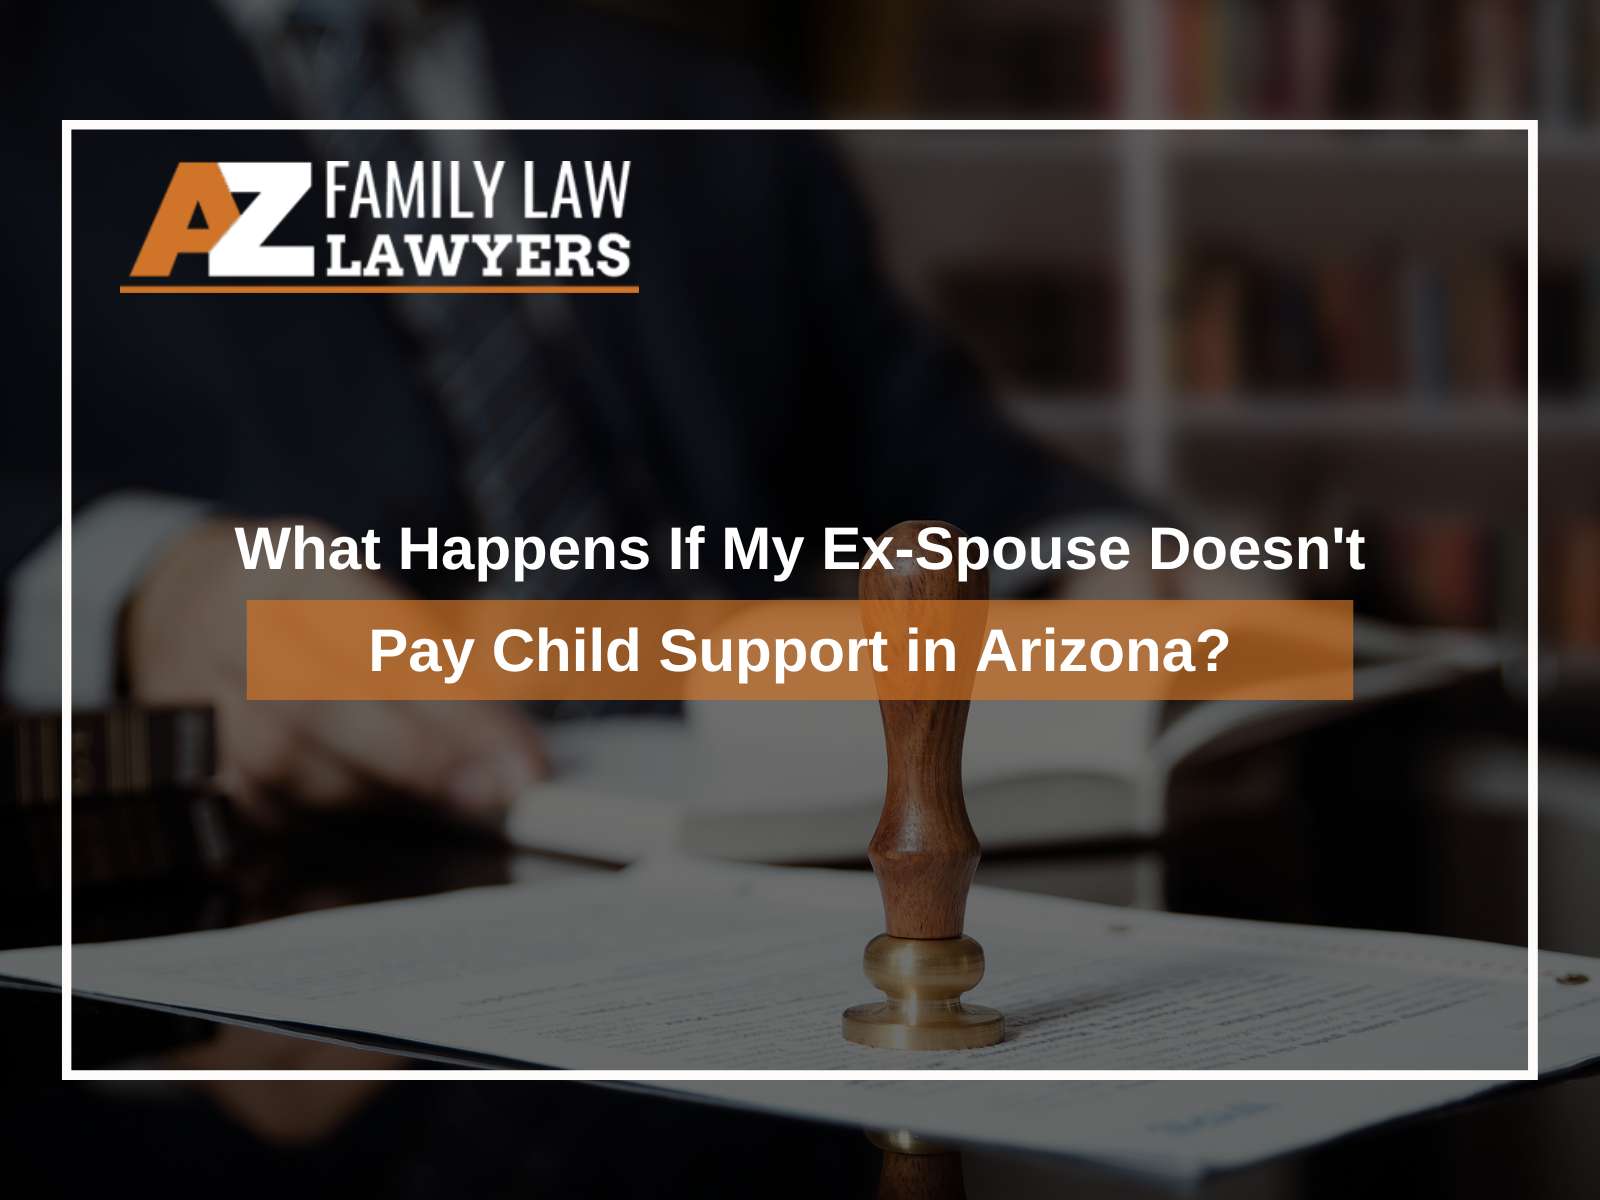 What Happens If My Ex-Spouse Doesn't Pay Child Support in Arizona?